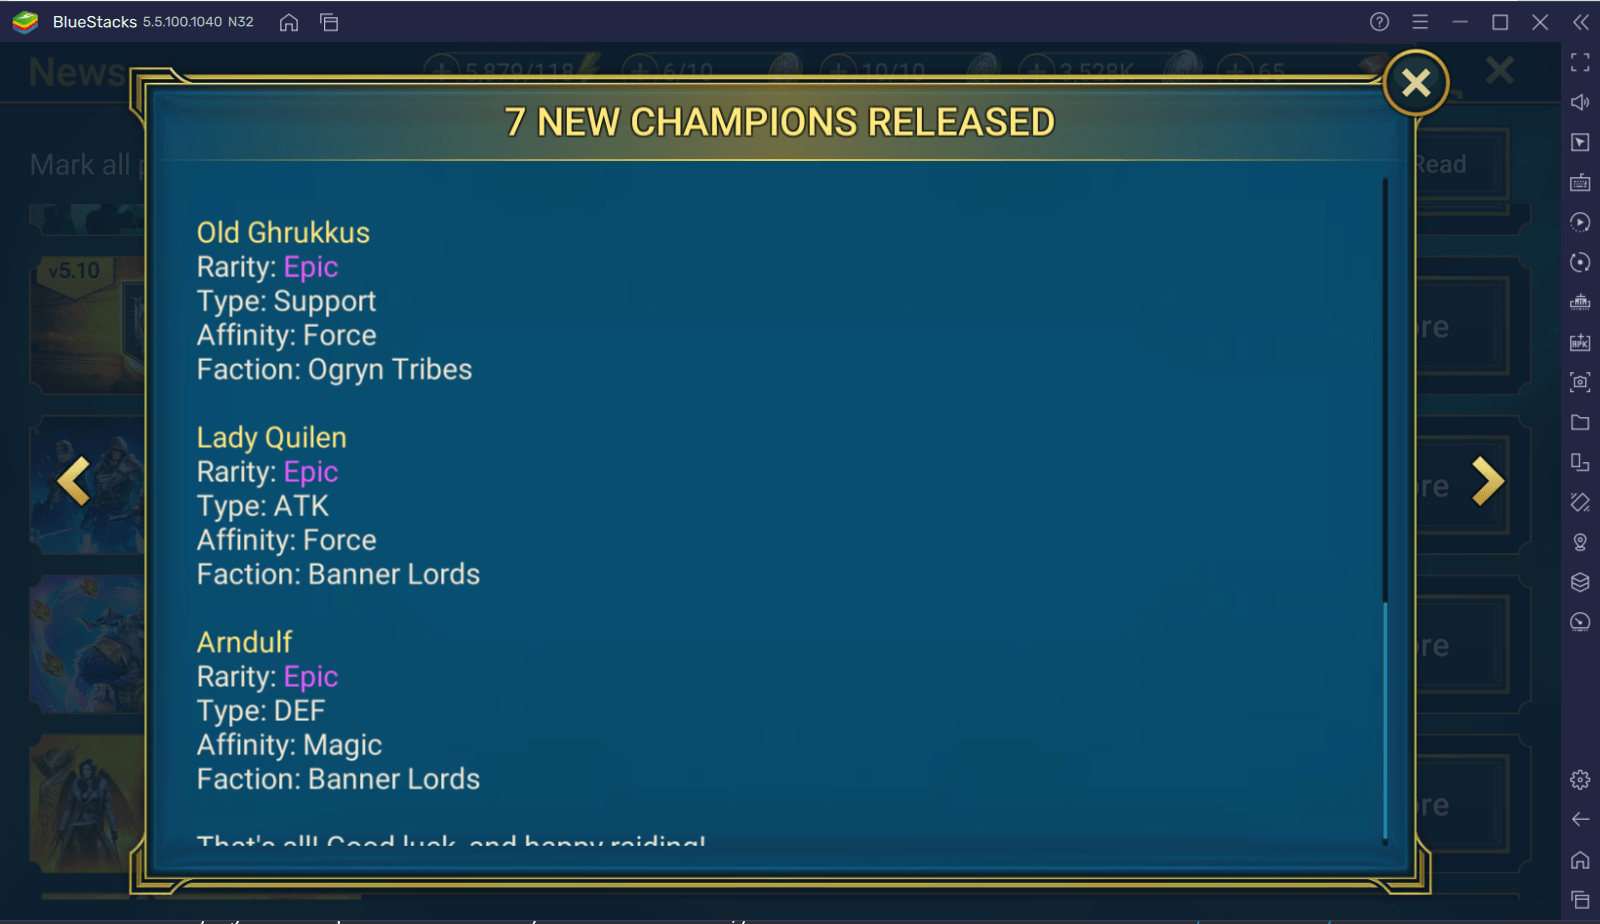 RAID: Shadow Legends – New Champions are Coming to Teleria for January 2022